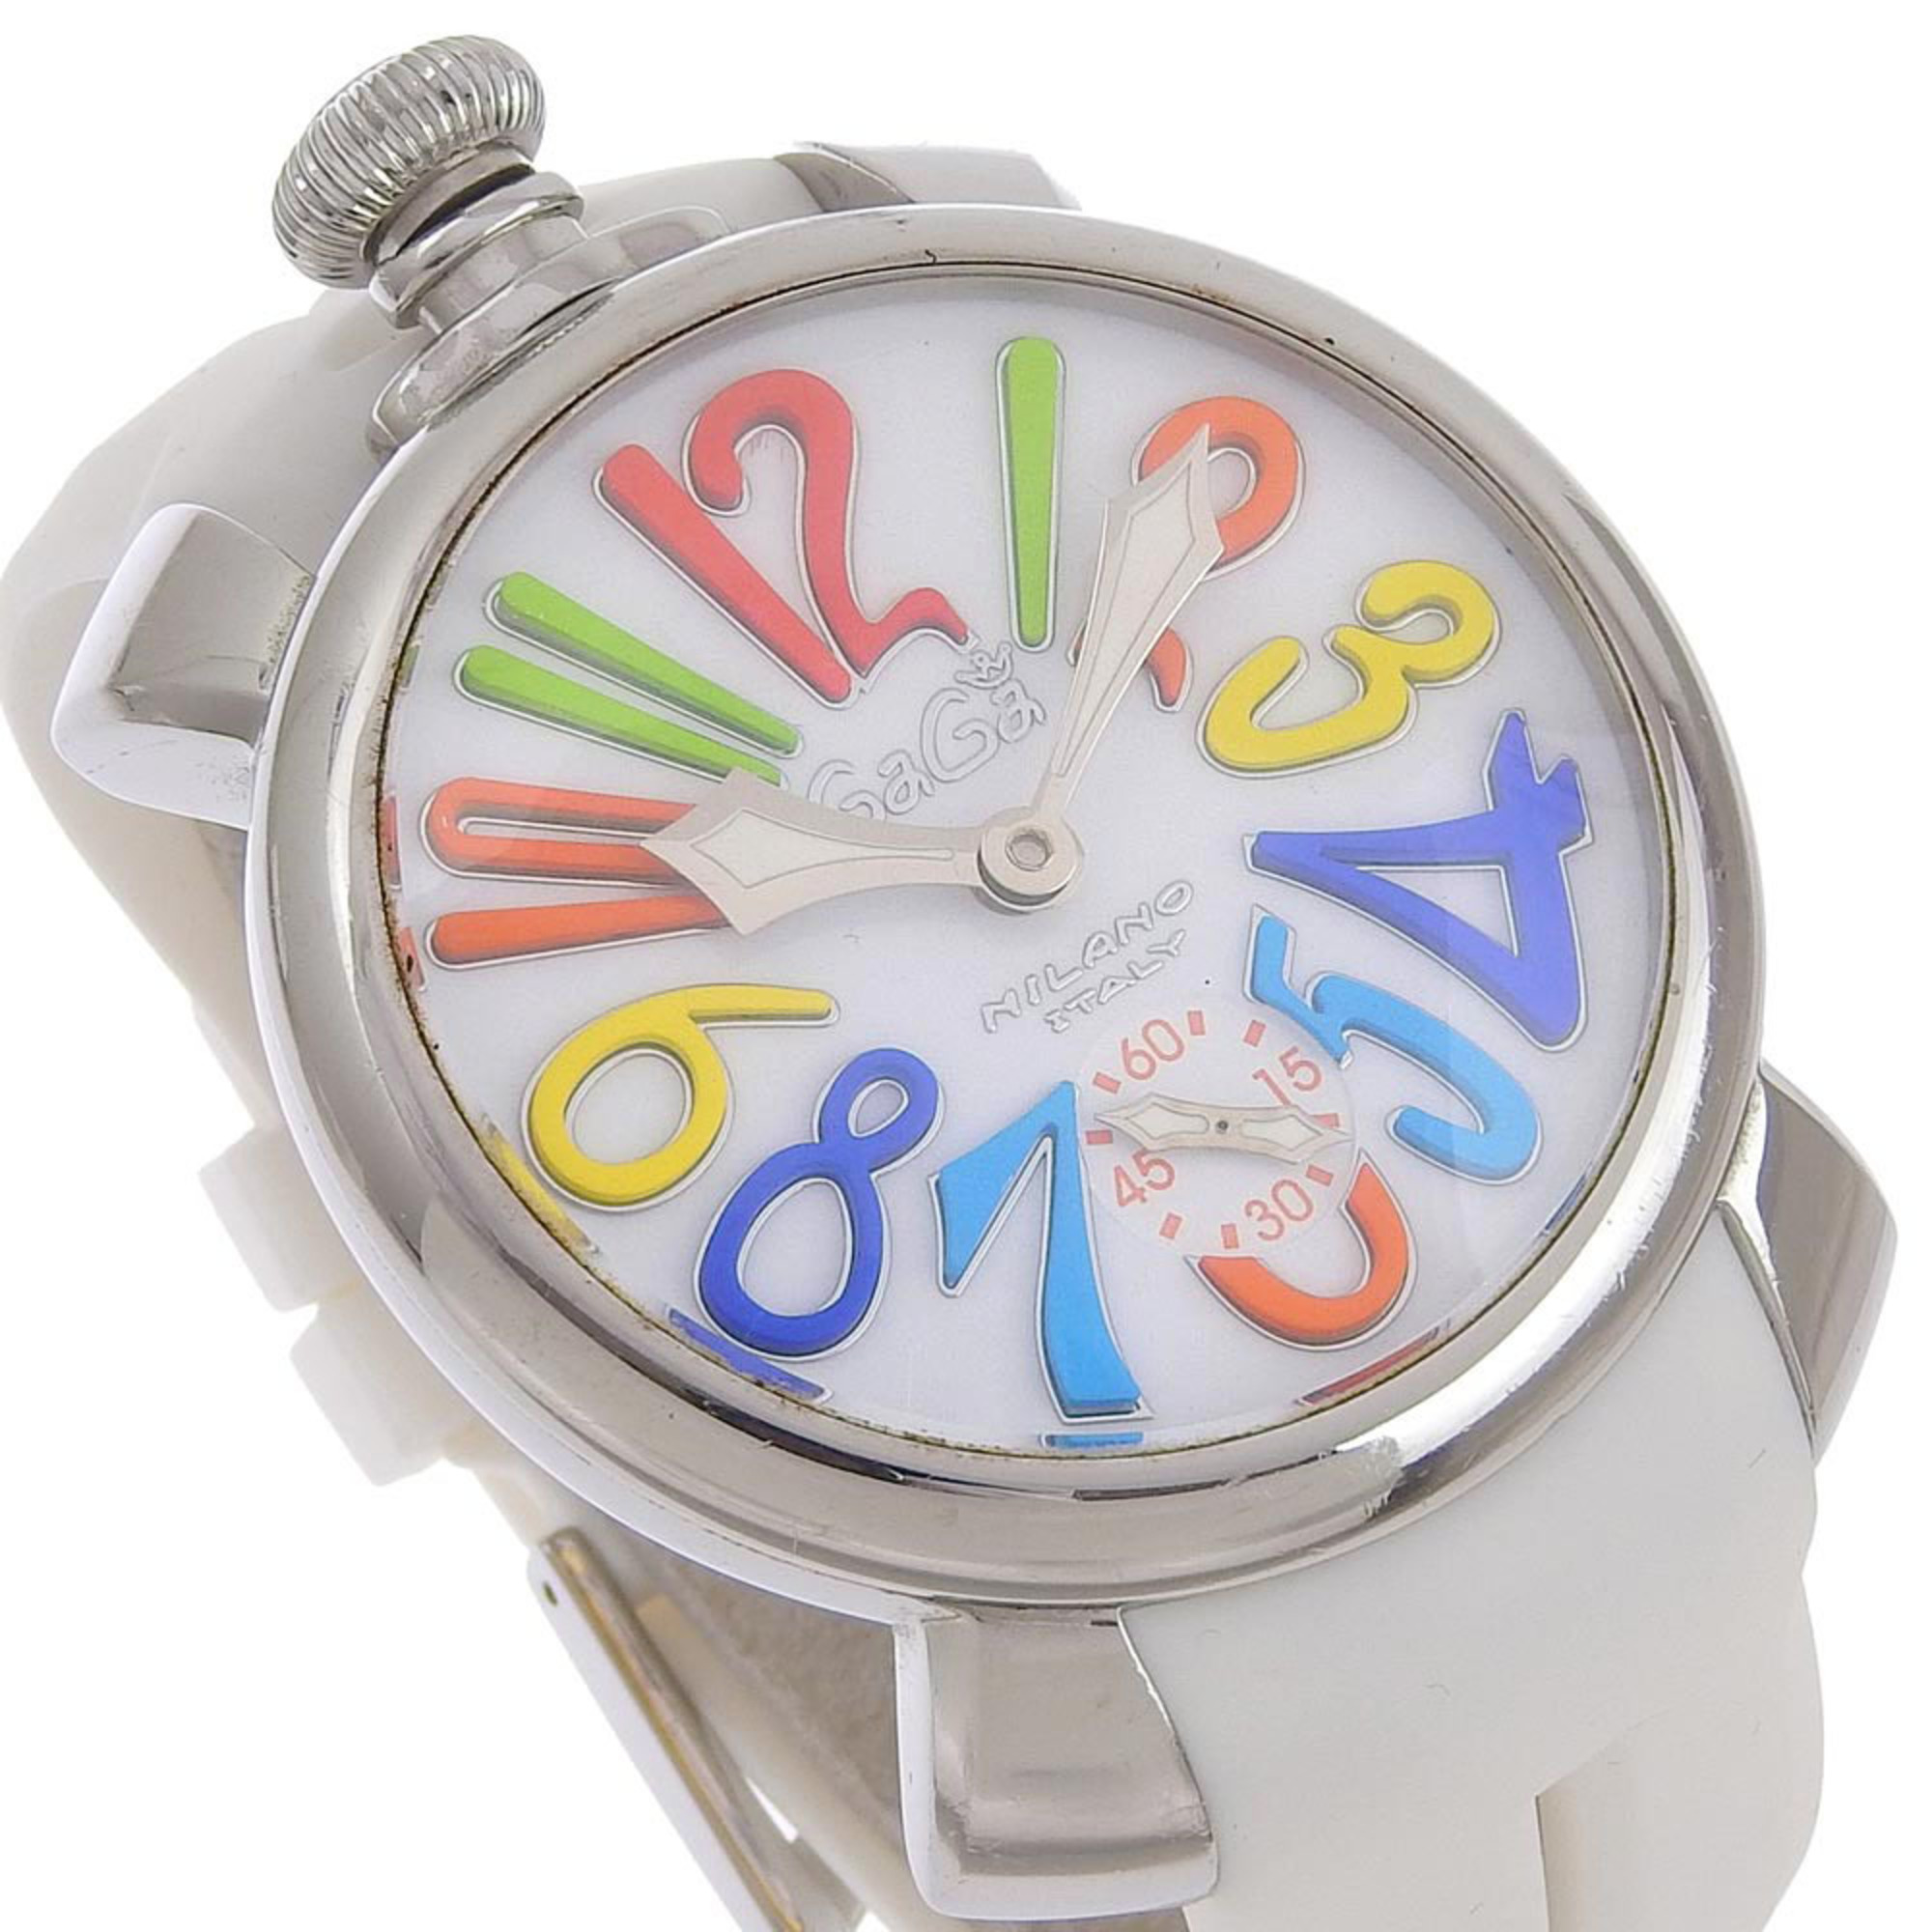 Gaga Milano Manuale 48 Watch Stainless Steel x Rubber Silver Manual Winding White Dial Men's I162823045